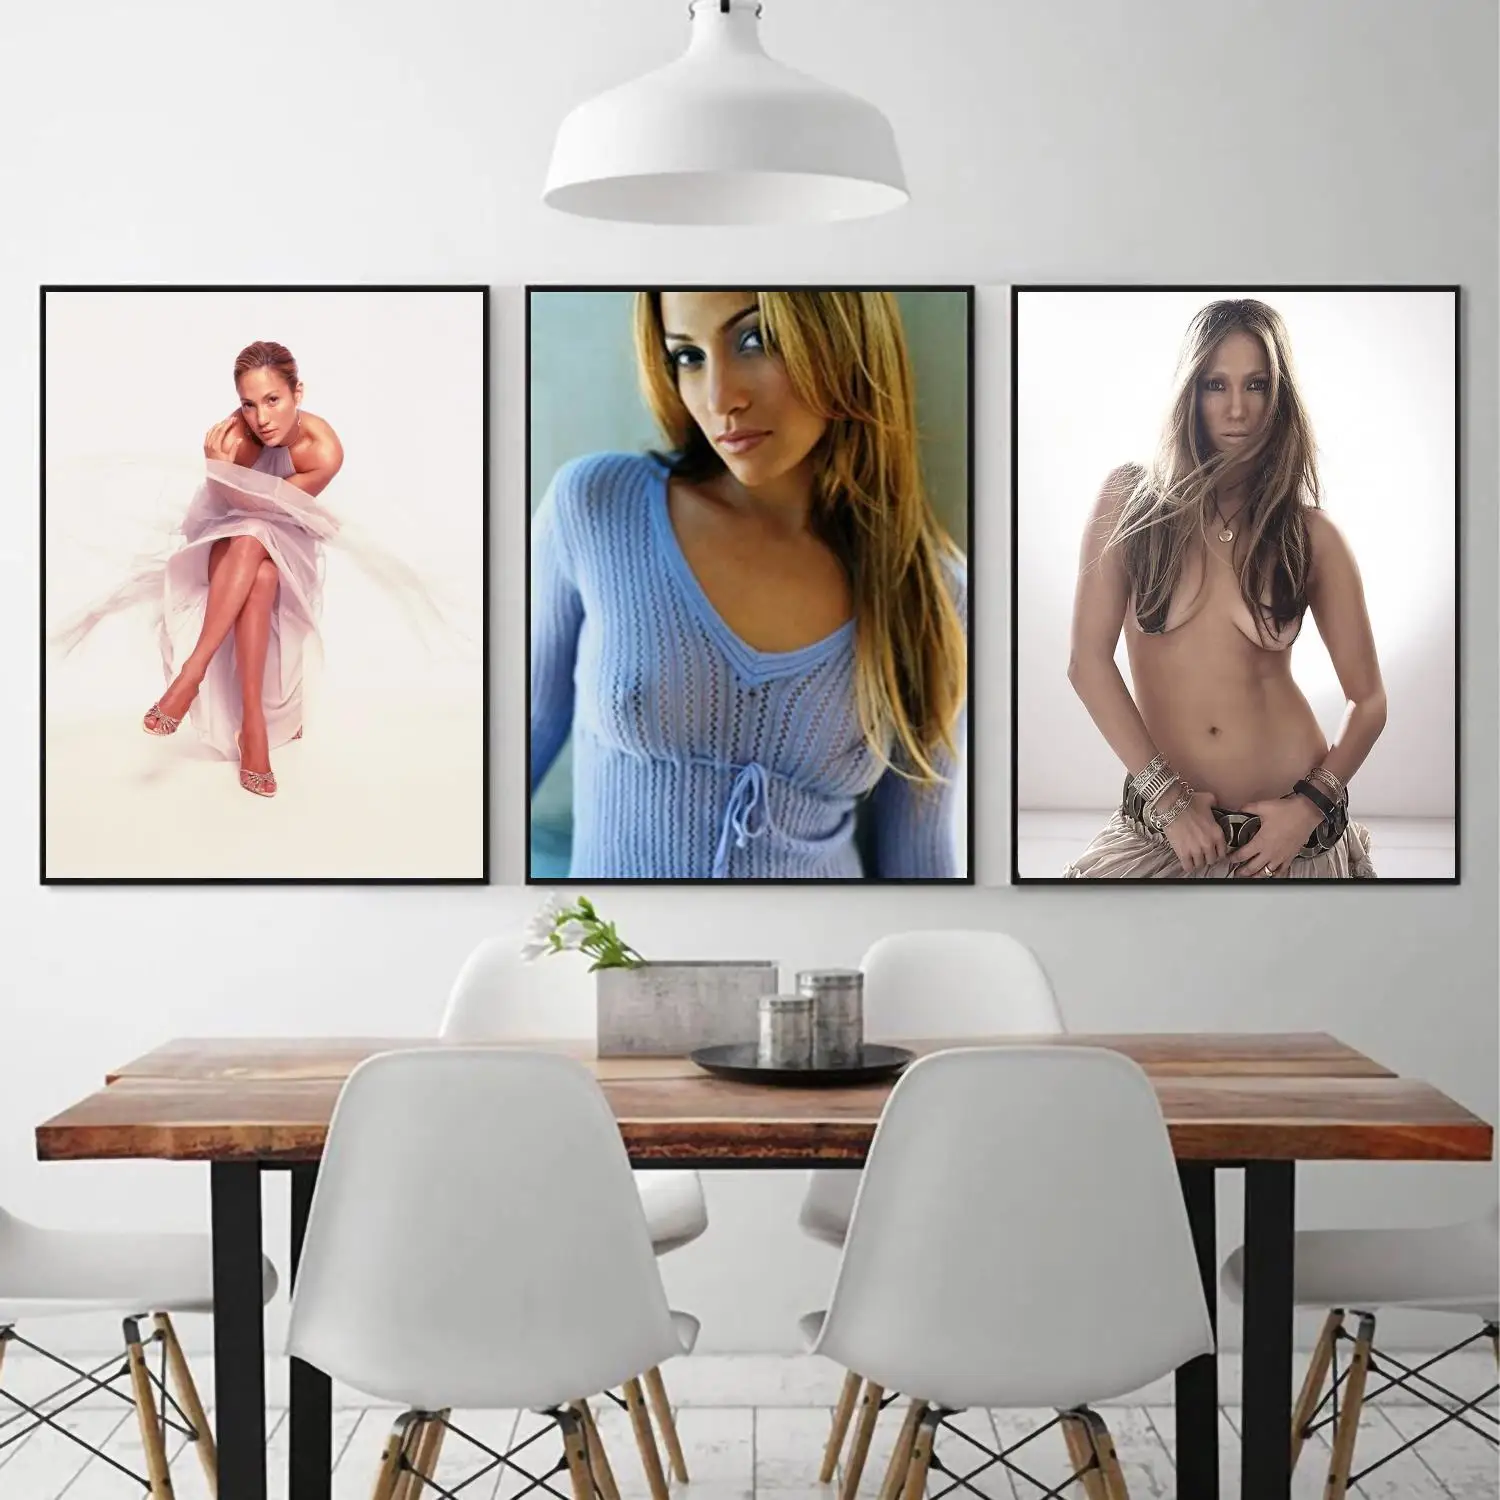 

jennifer lopez poster 24x36 Wall Art Canvas Posters Decoration Art Poster Personalized Gift Modern Family bedroom Painting